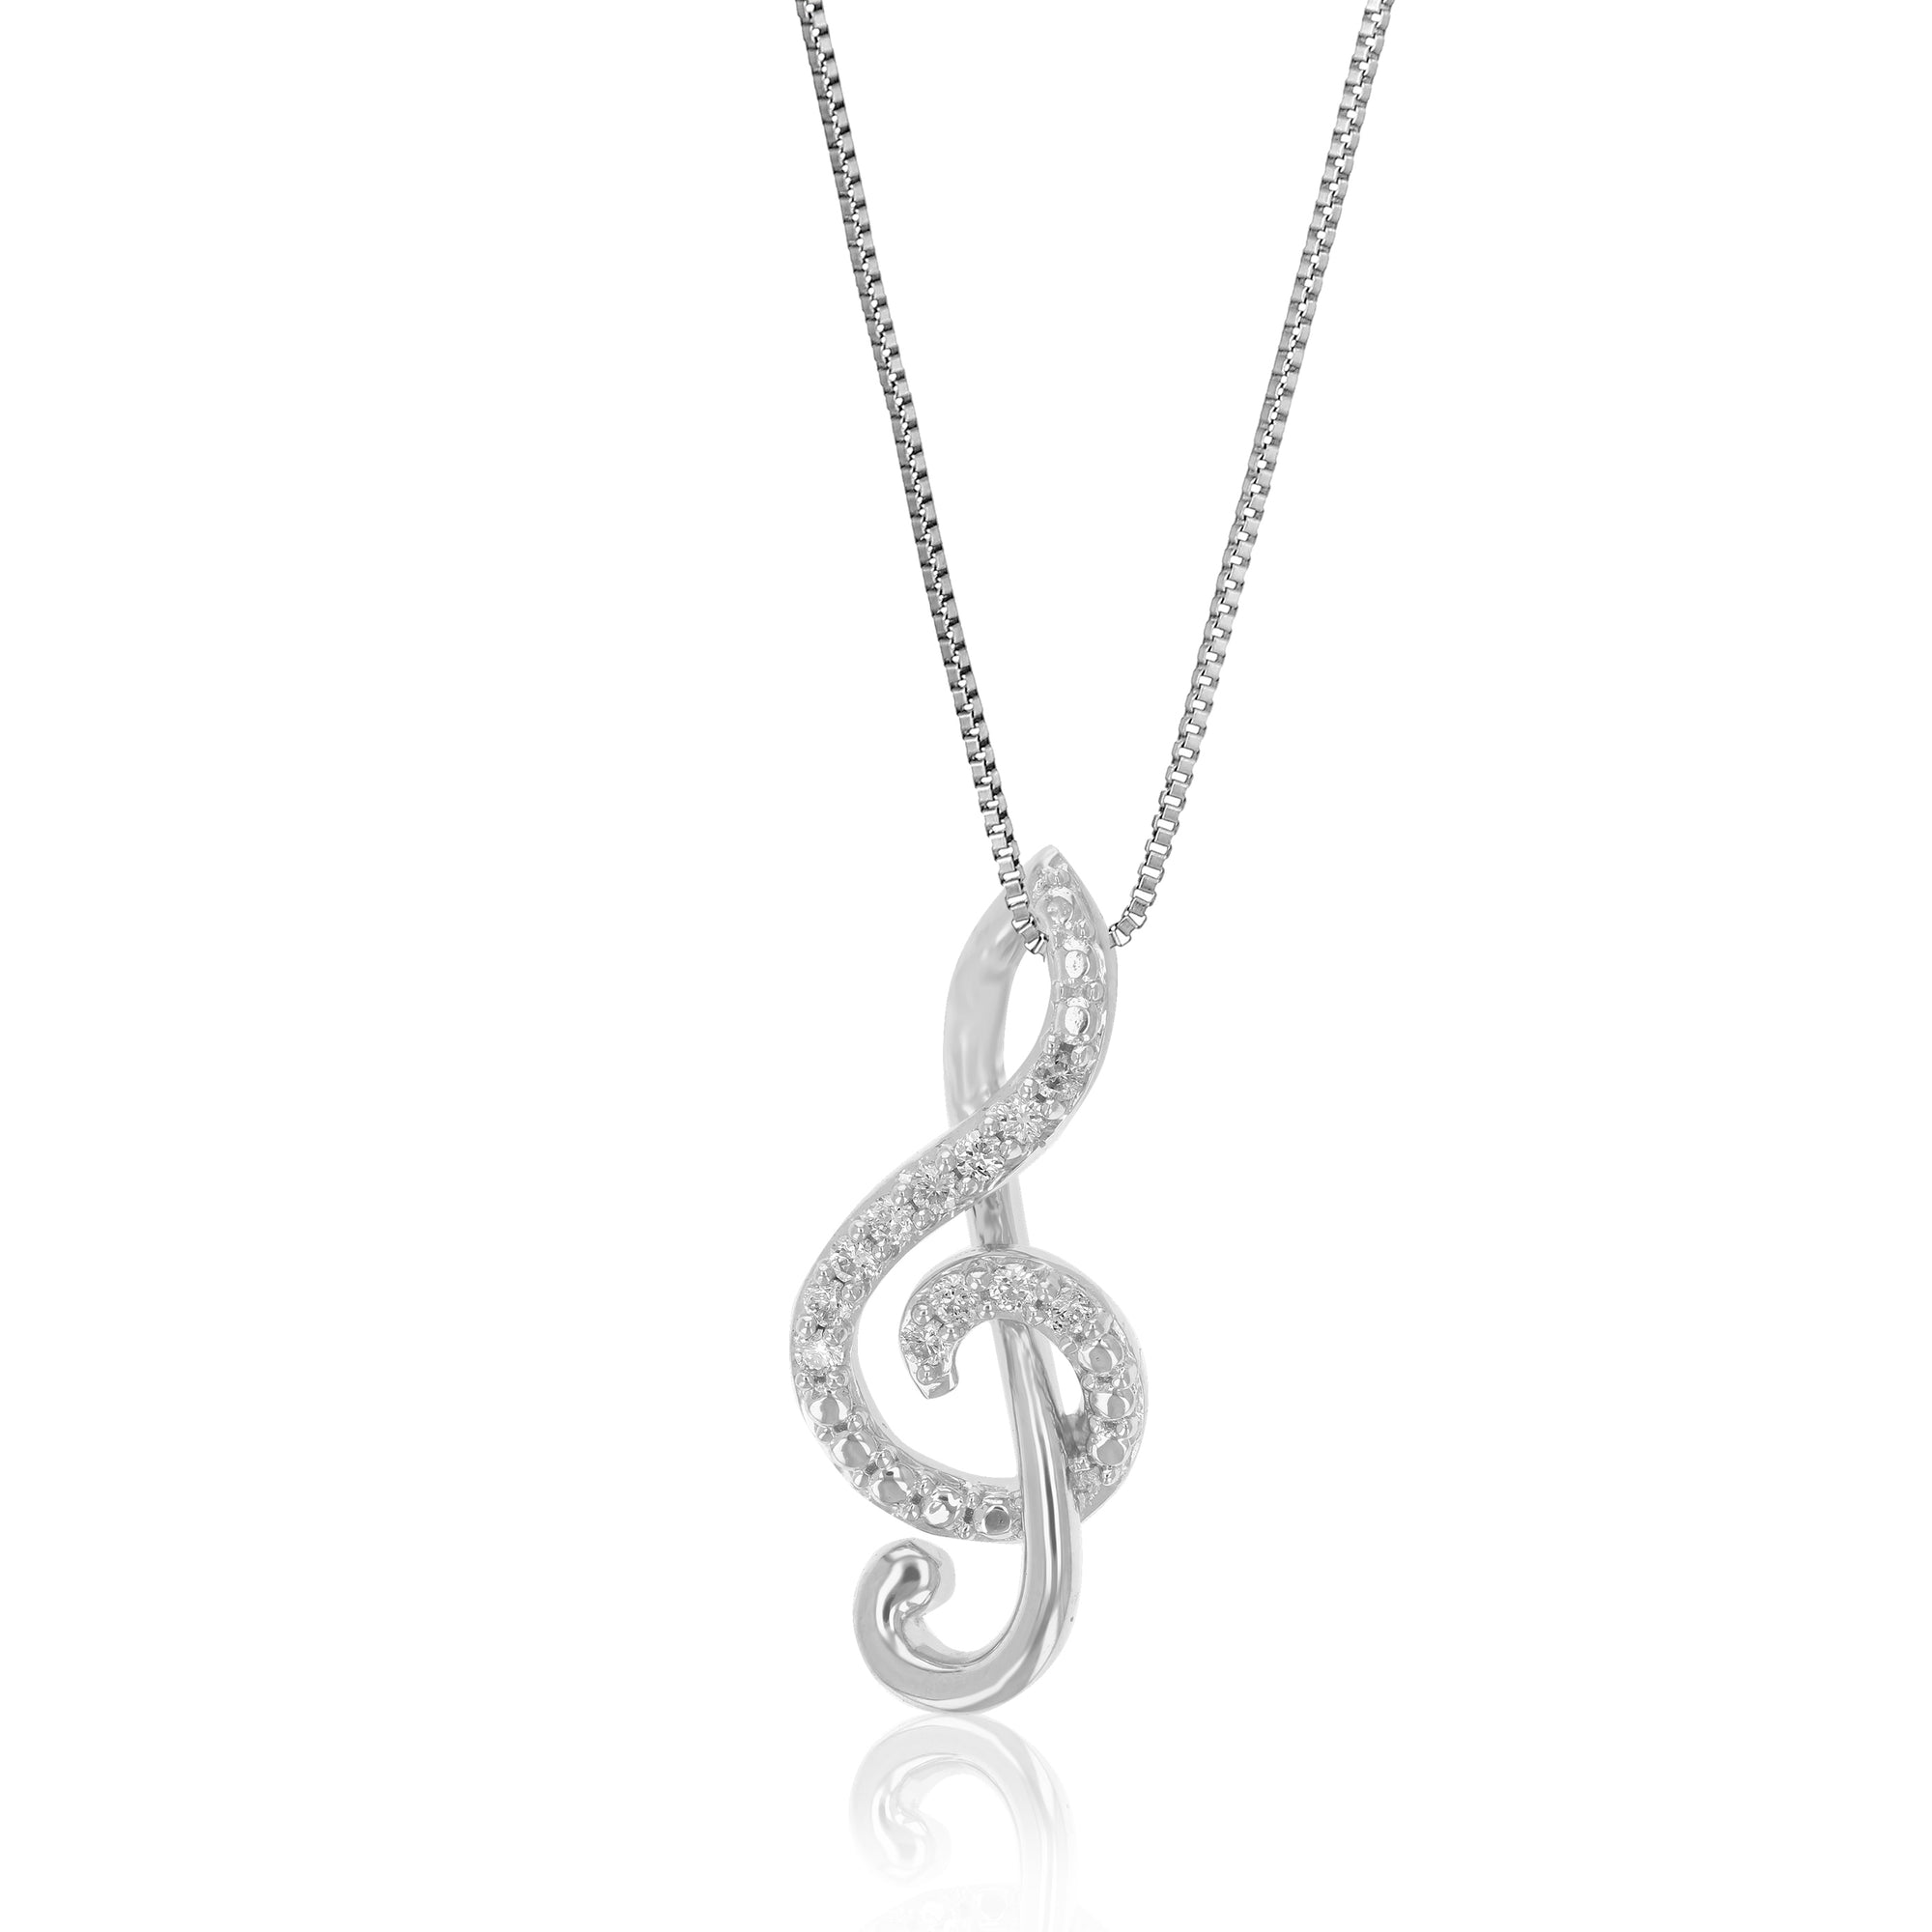 1/10 cttw Diamond Pendant Necklace for Women, Lab Grown Diamond Music Pendant Necklace in .925 Sterling Silver with Chain, Size 3/4 Inch